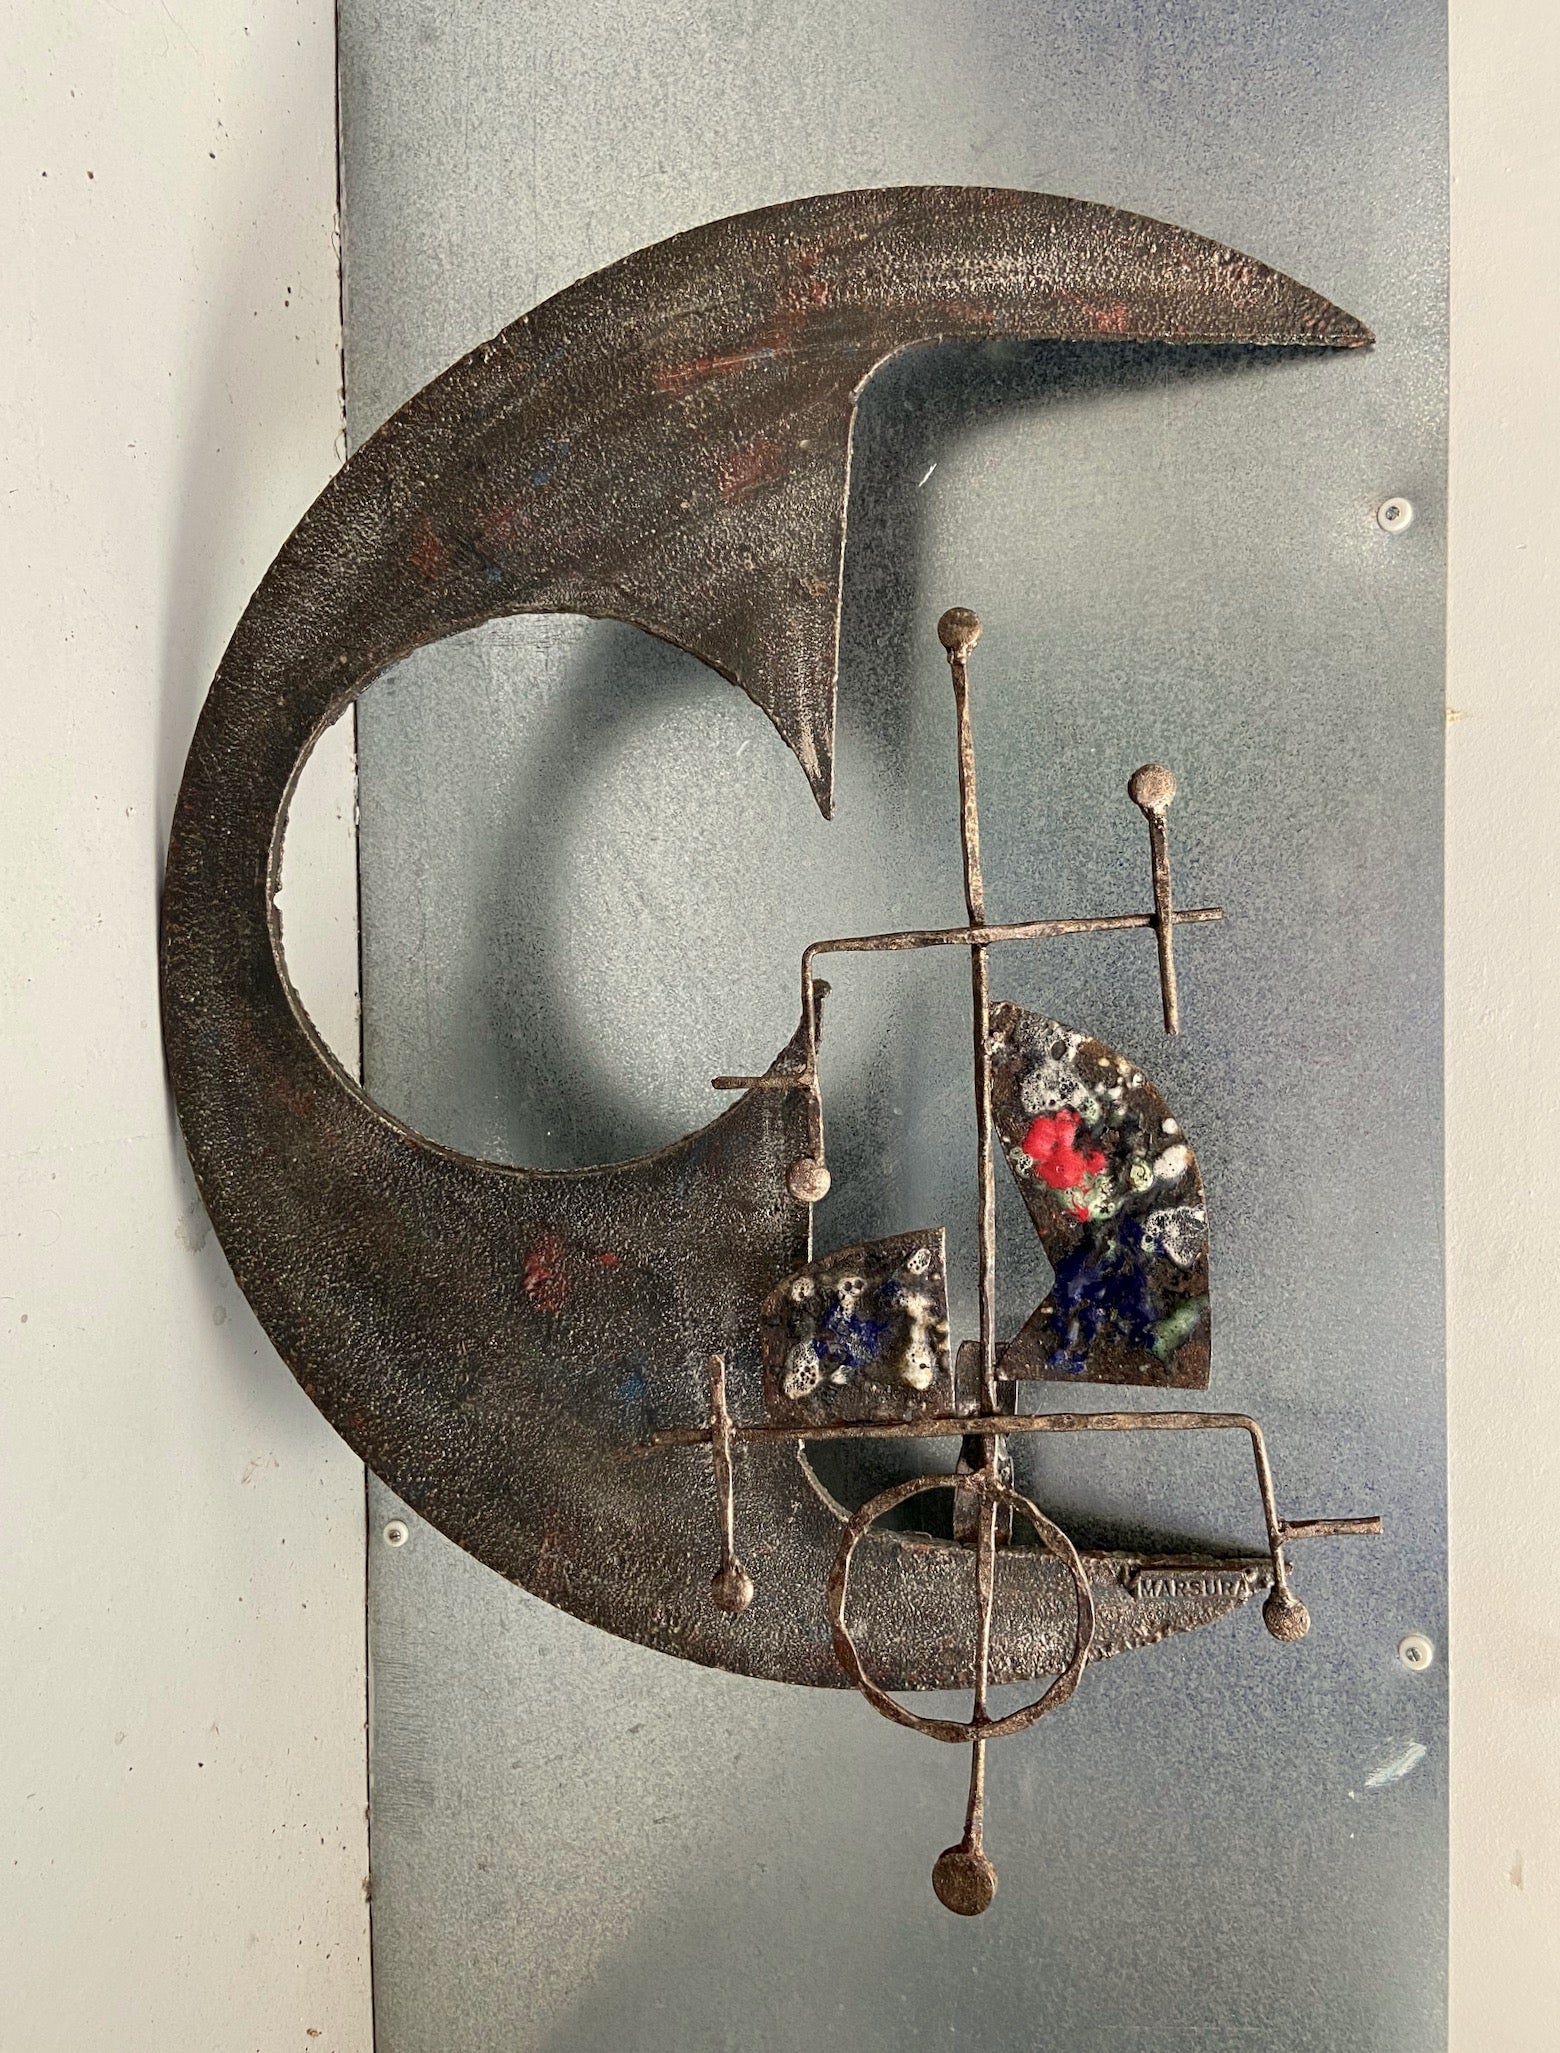 Italian Wrought Iron and Enamel Brutalist Wall Sculpture by Salvino Marsura circa 1970's For Sale